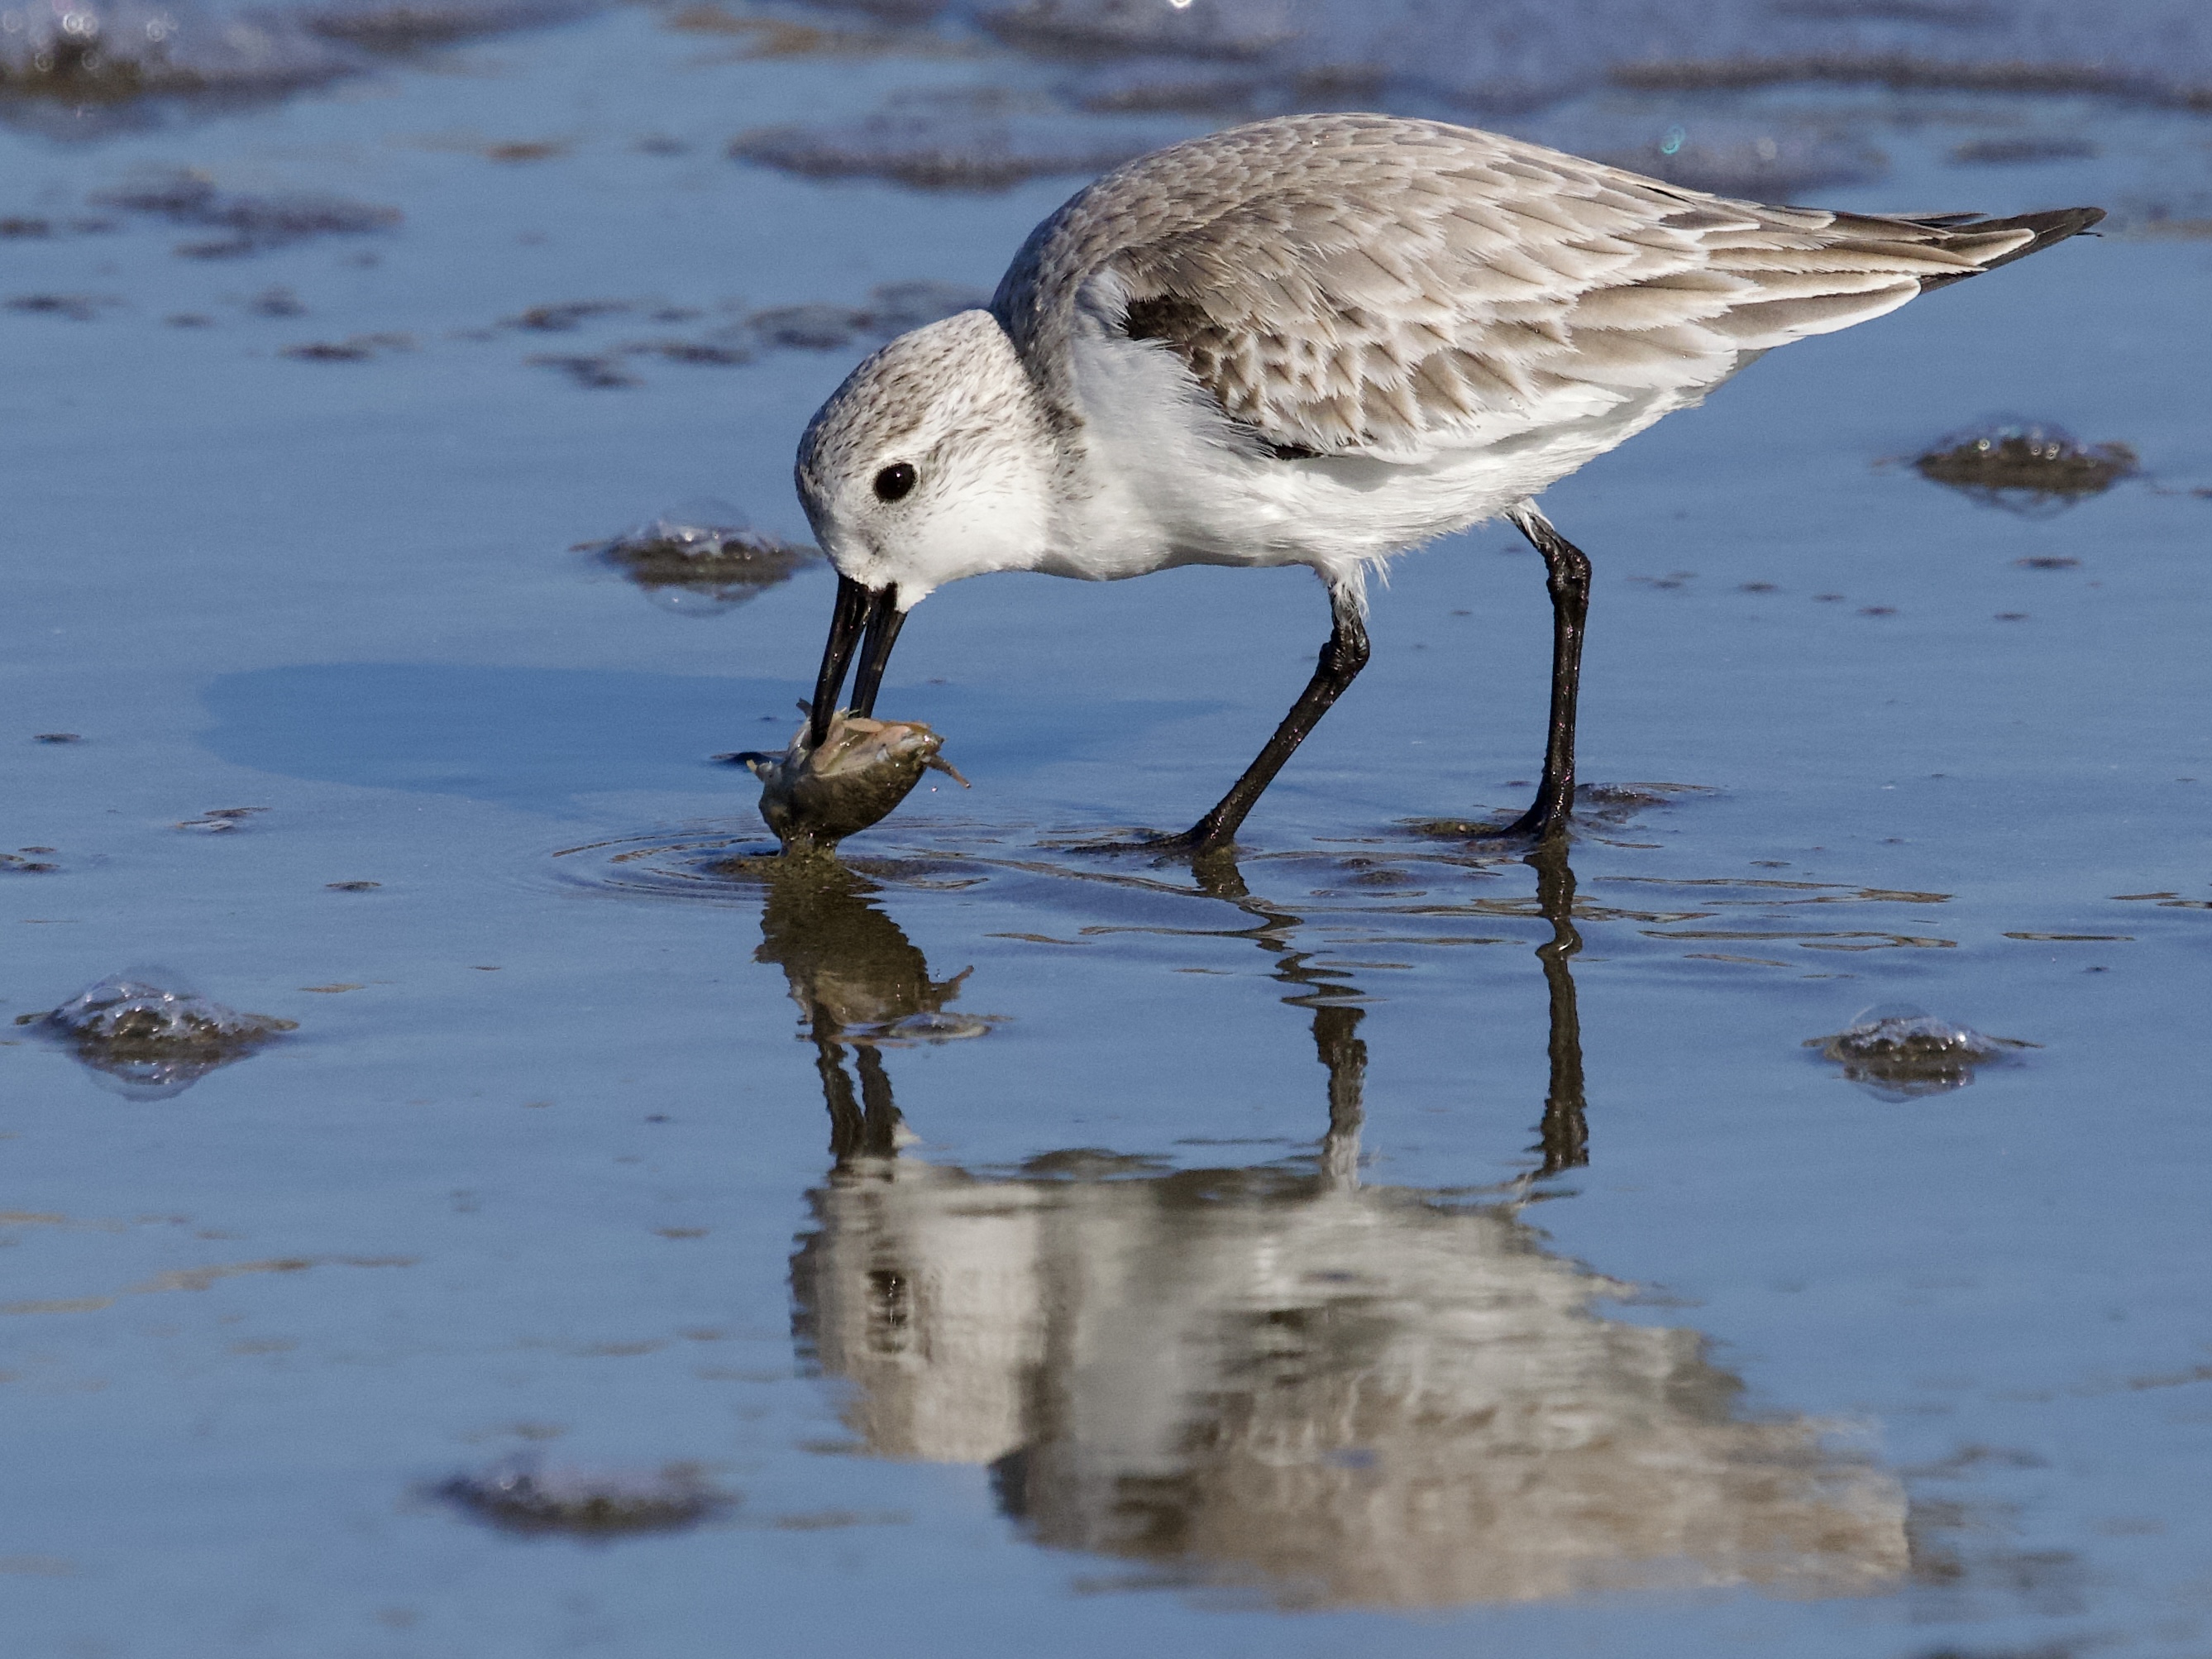 Sanderling with Mole Crab Reflected in Swash